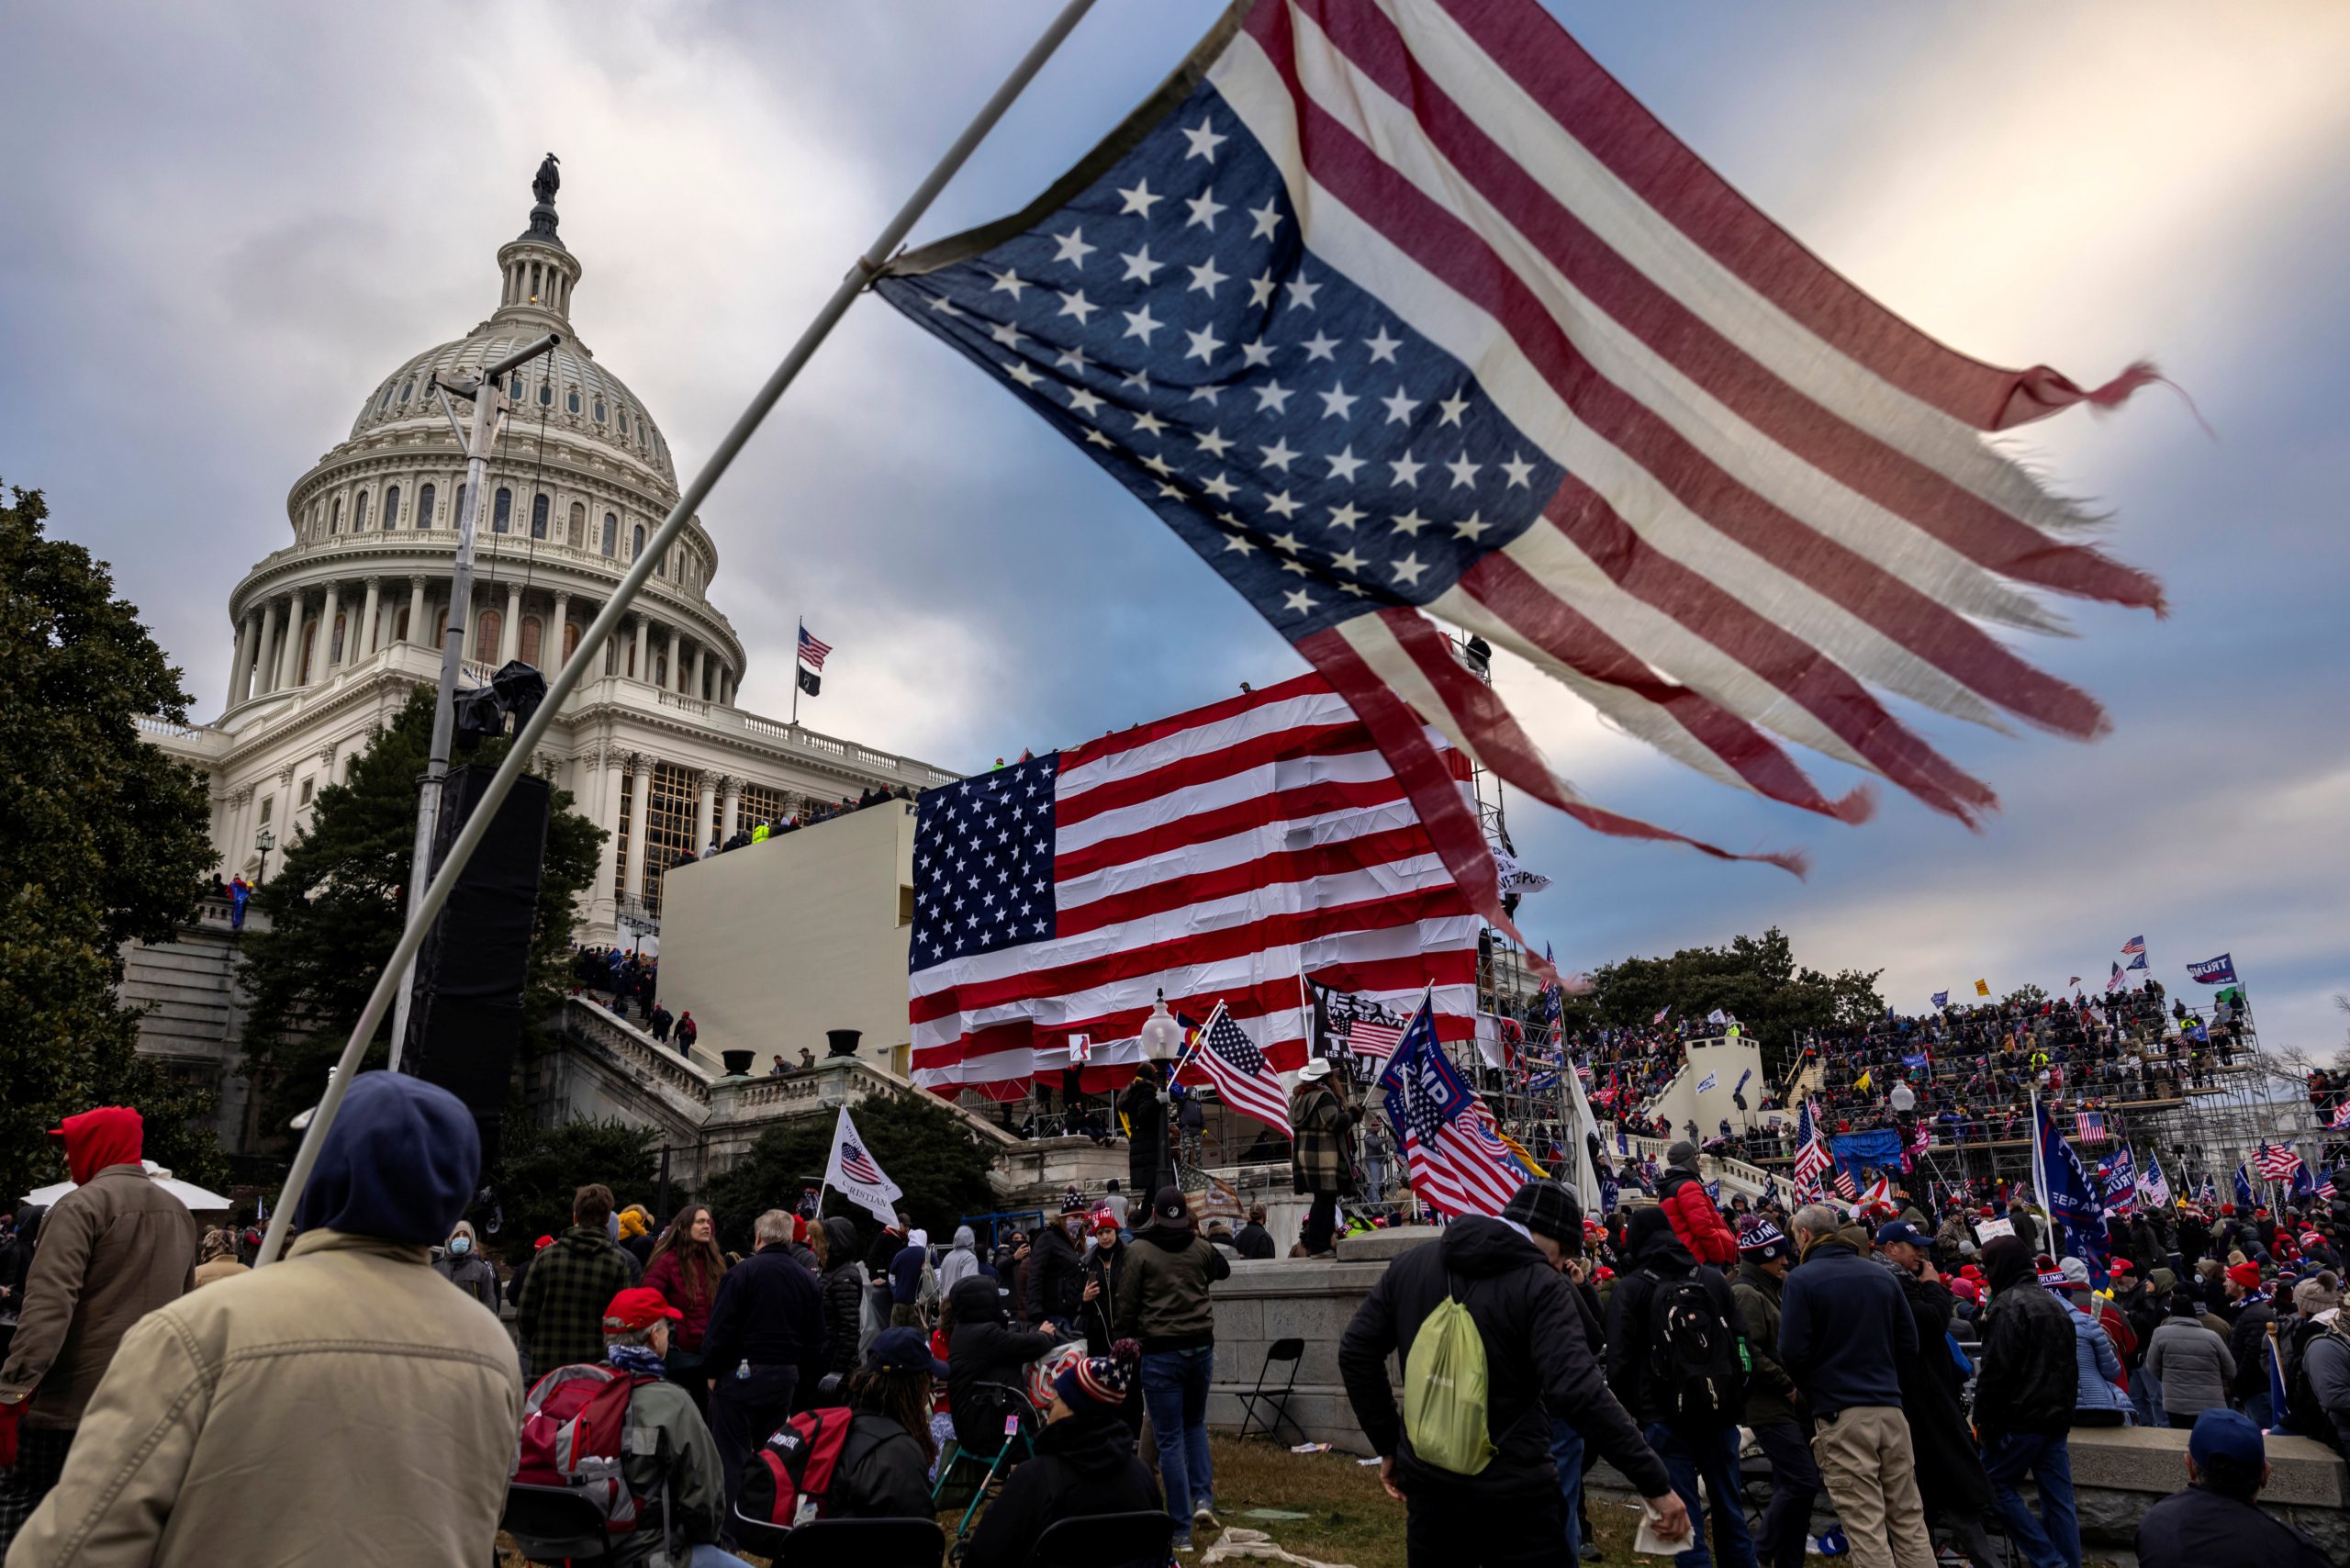 WASHINGTON, DC - JANUARY 6: Pro-Trump protesters gather in front of the U.S. Capitol Building on January 6, 2021 in Washington, DC. Trump supporters gathered in the nation's capital to protest the ratification of President-elect Joe Biden's Electoral College victory over President Trump in the 2020 election. A pro-Trump mob later stormed the Capitol, breaking windows and clashing with police officers. Five people died as a result. (Photo by Brent Stirton/Getty Images)